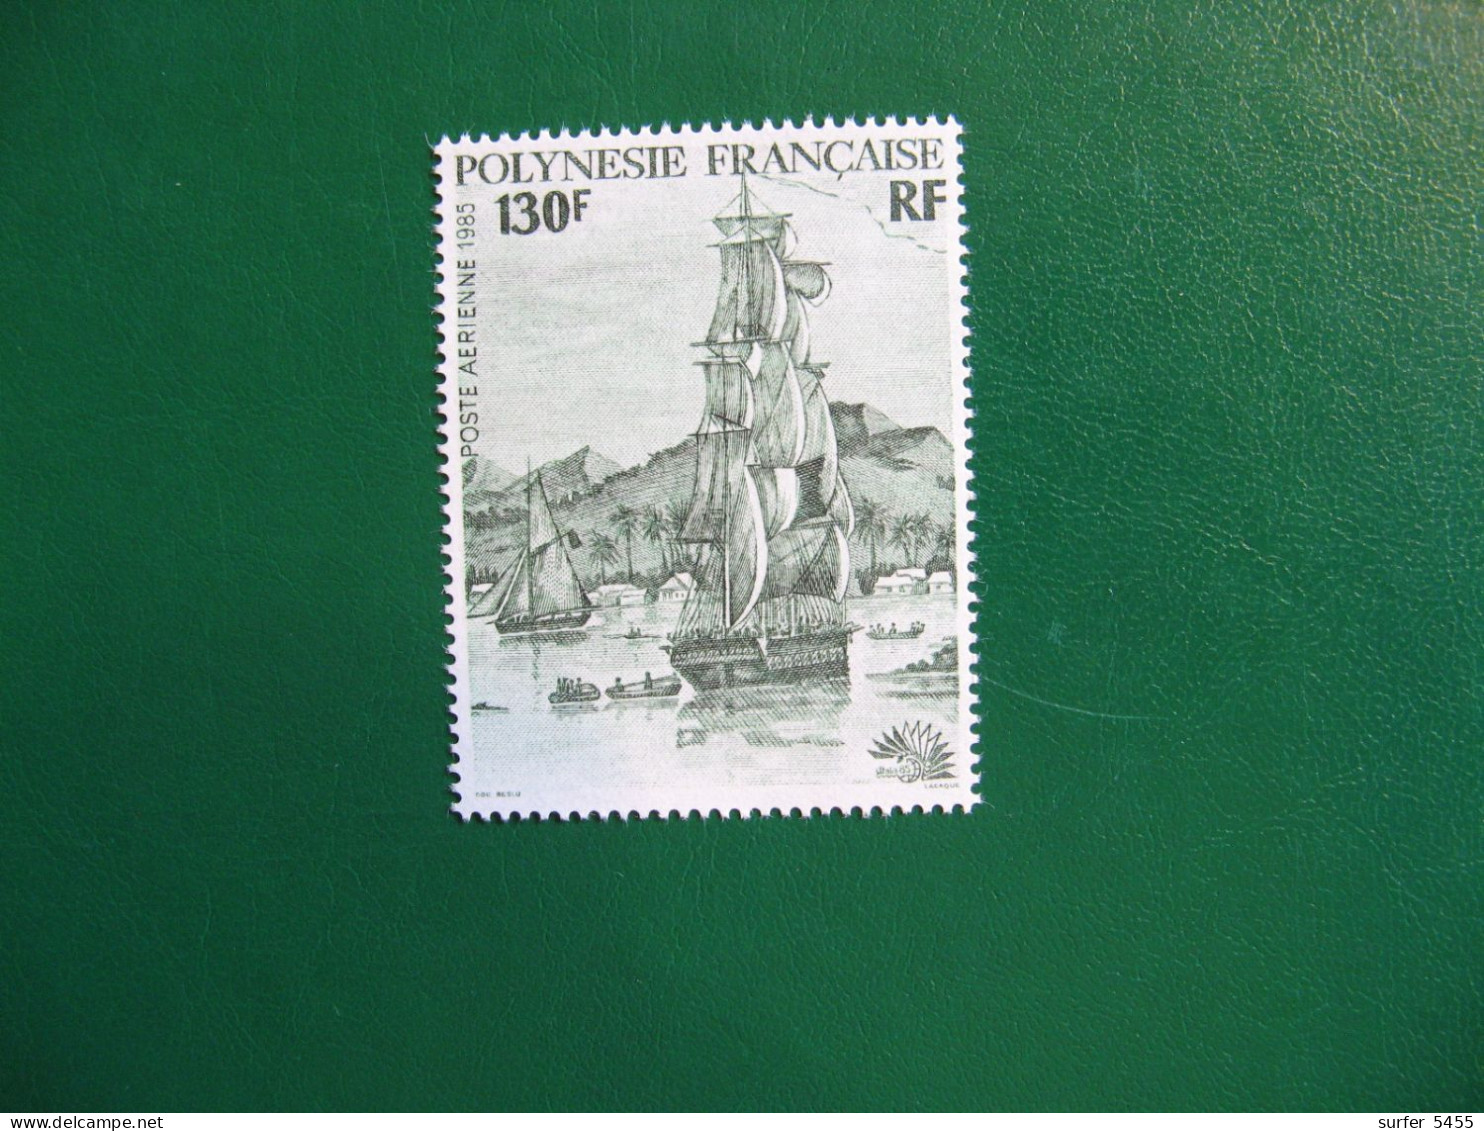 P0LYNESIE PO AERIENNE N° 189 TIMBRE NEUF ** LUXE - MNH - SERIE COMPLETE - FACIALE 1,09 EURO - Neufs